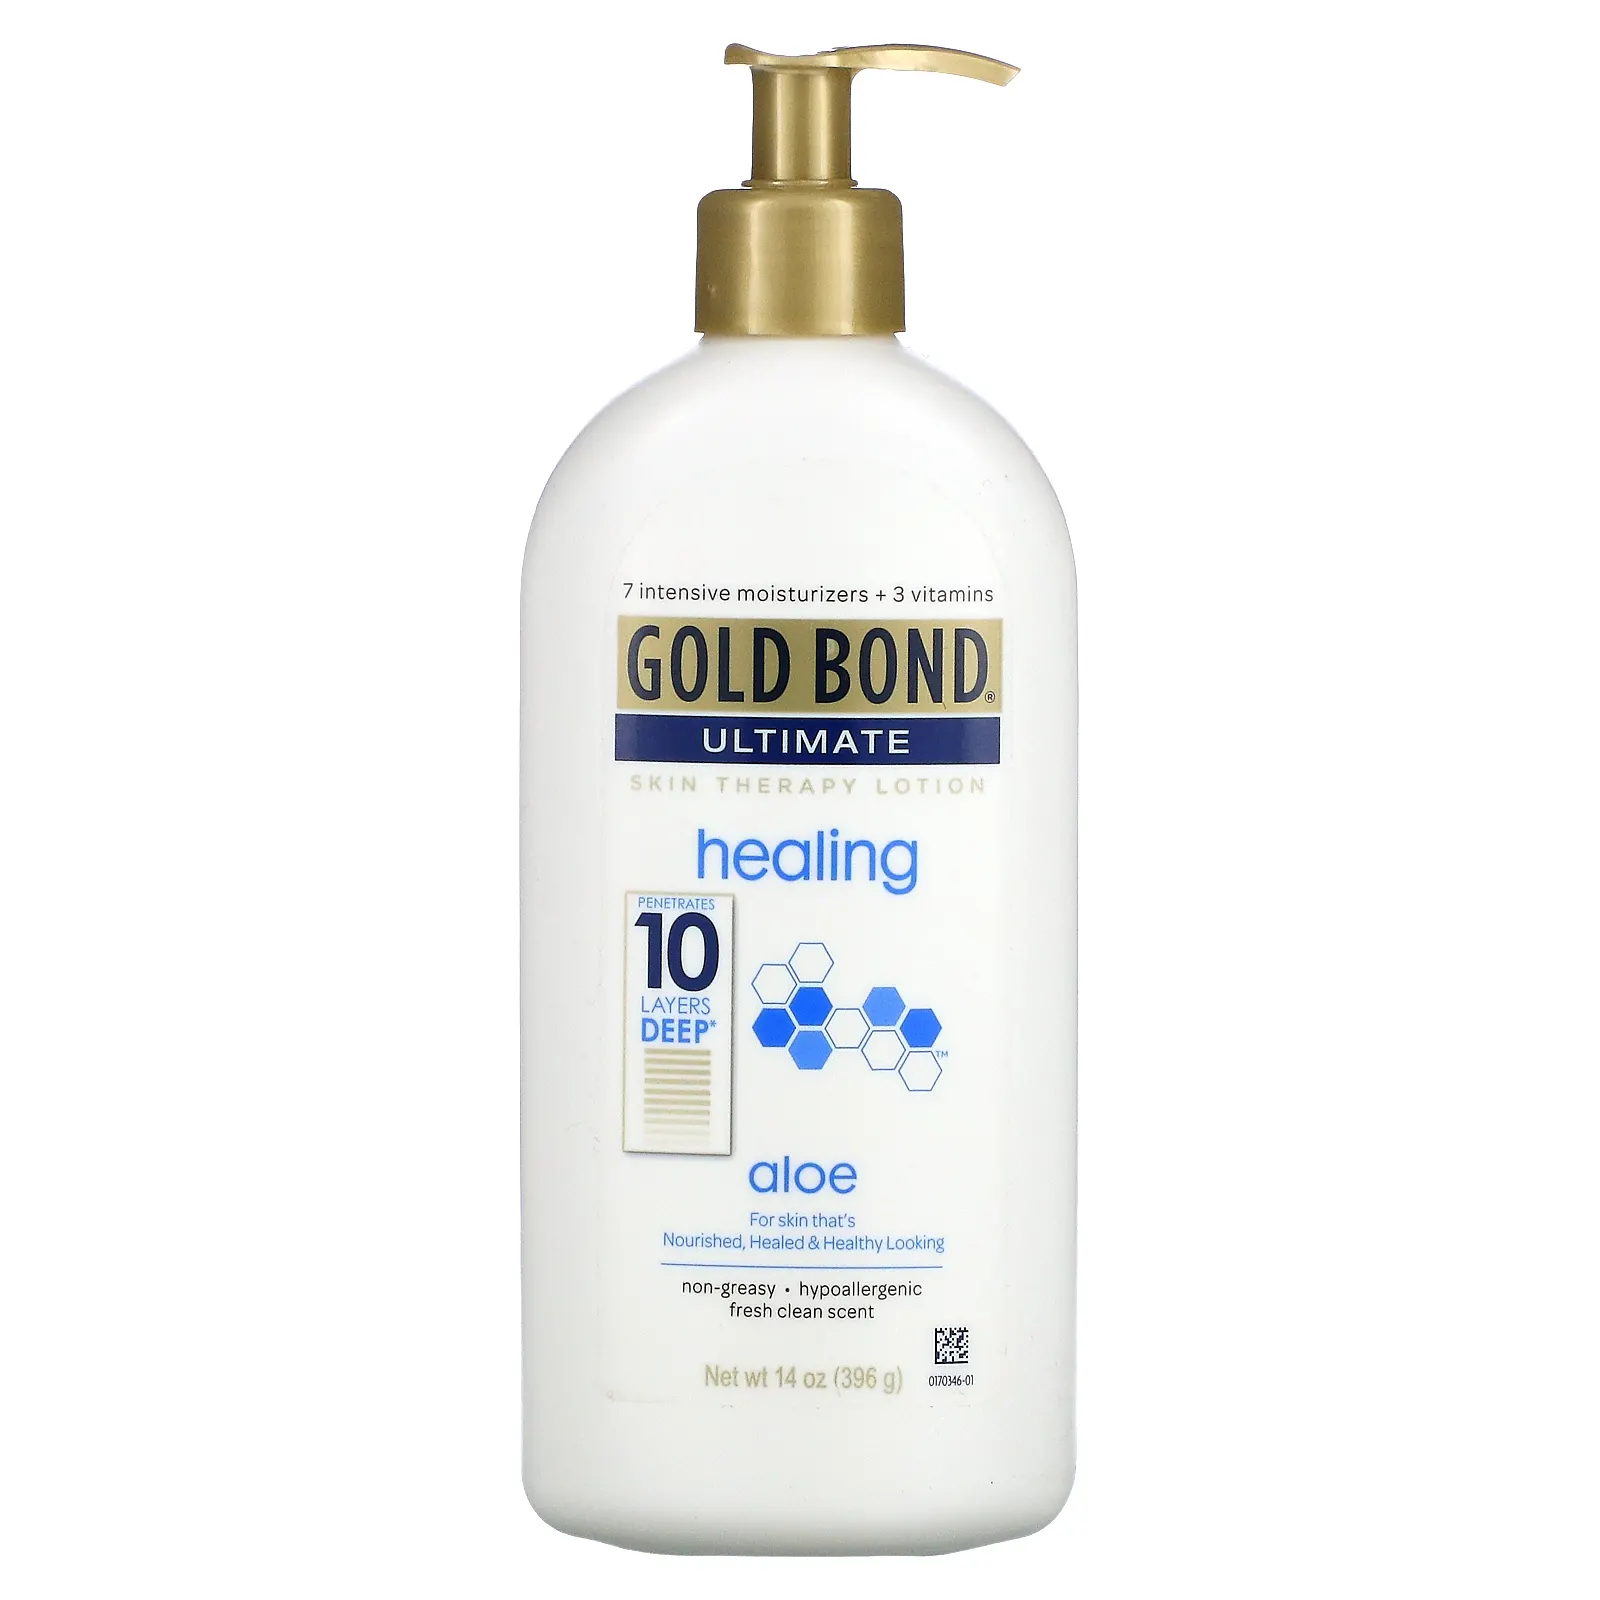 FEMMENORDIC's choice in the Gold Bond vs Aquaphor comparison, Gold Bond Healing Skin Therapy Lotion